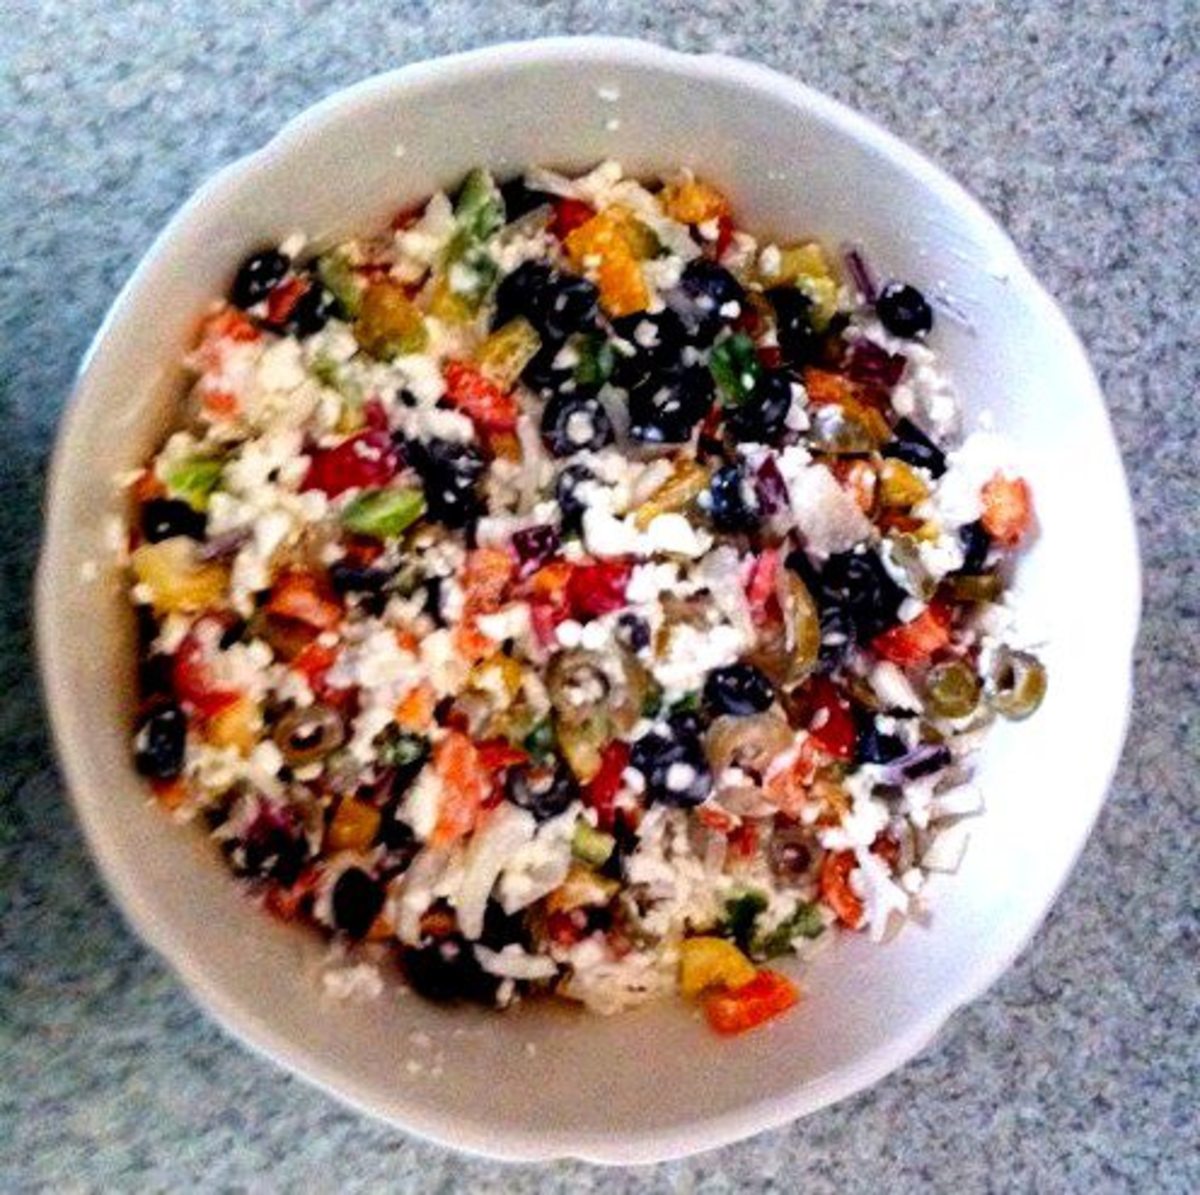 Recipe for the Optional Veggie Cottage Cheese Salad